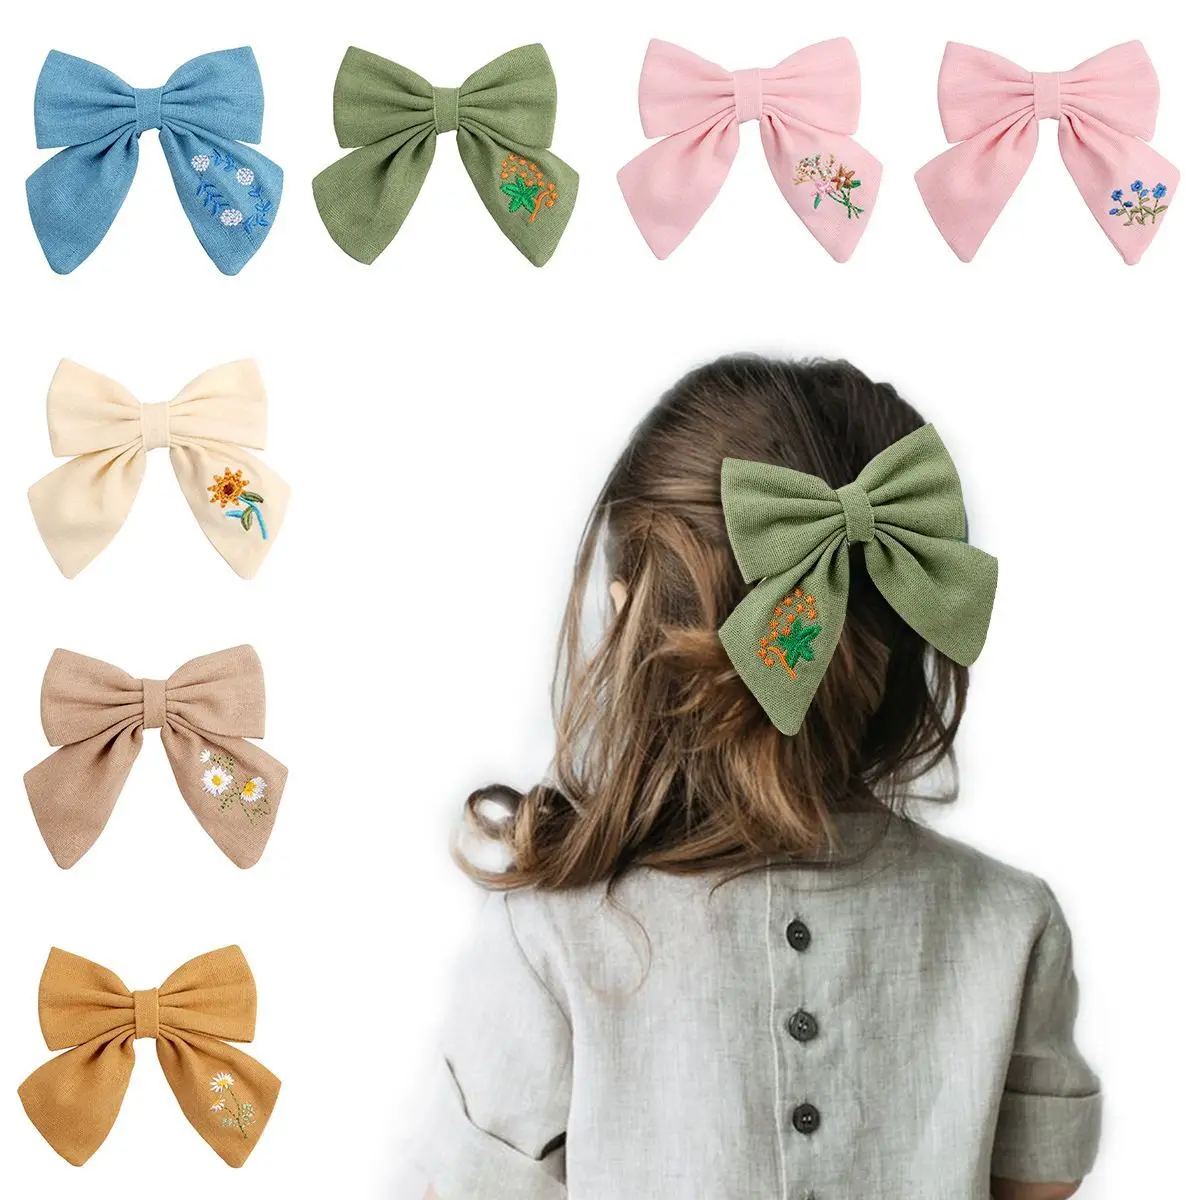 60pc lot new 3 6inch cotton hair bow hair clips girl embroidery hair bow nylon headband baby girls floral print hairpins child 30pc/lot New 5